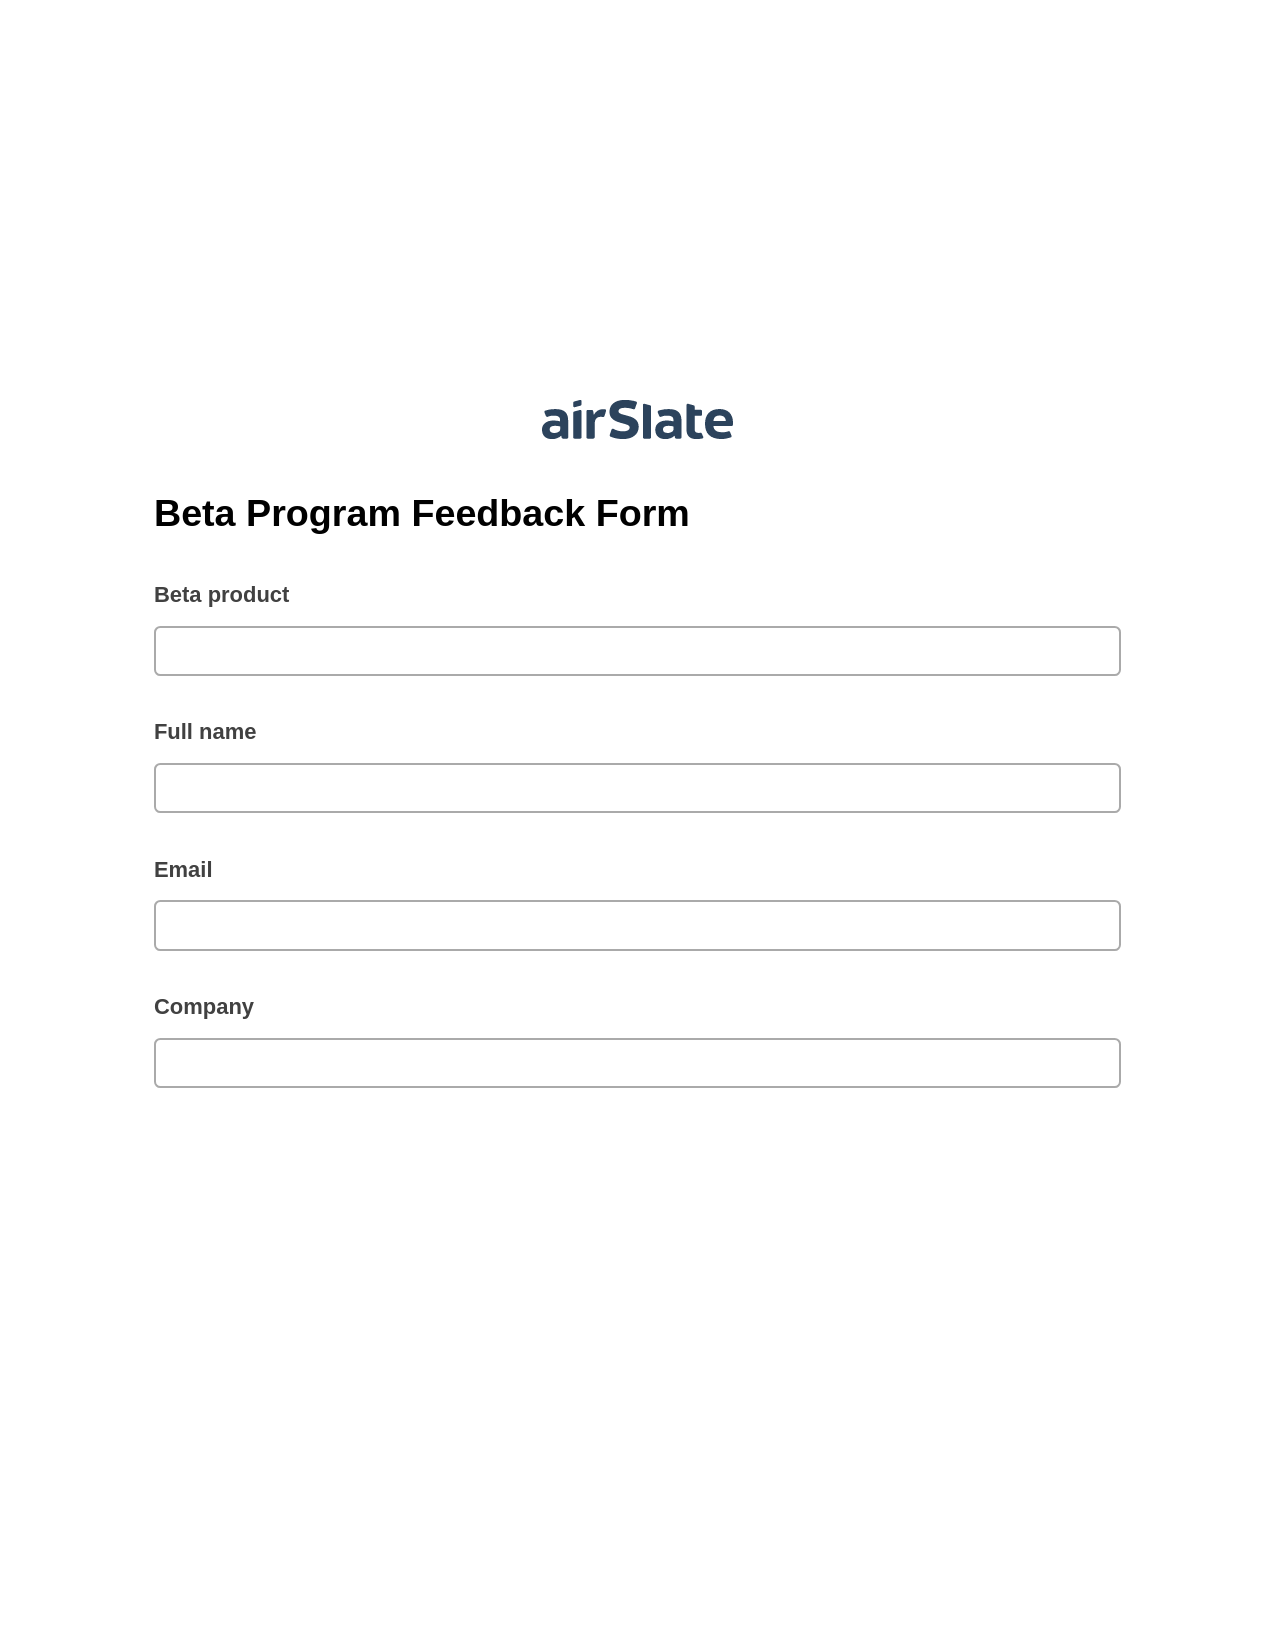 Beta Program Feedback Form Pre-fill from Salesforce Record Bot, Unassign Role Bot, Export to Smartsheet